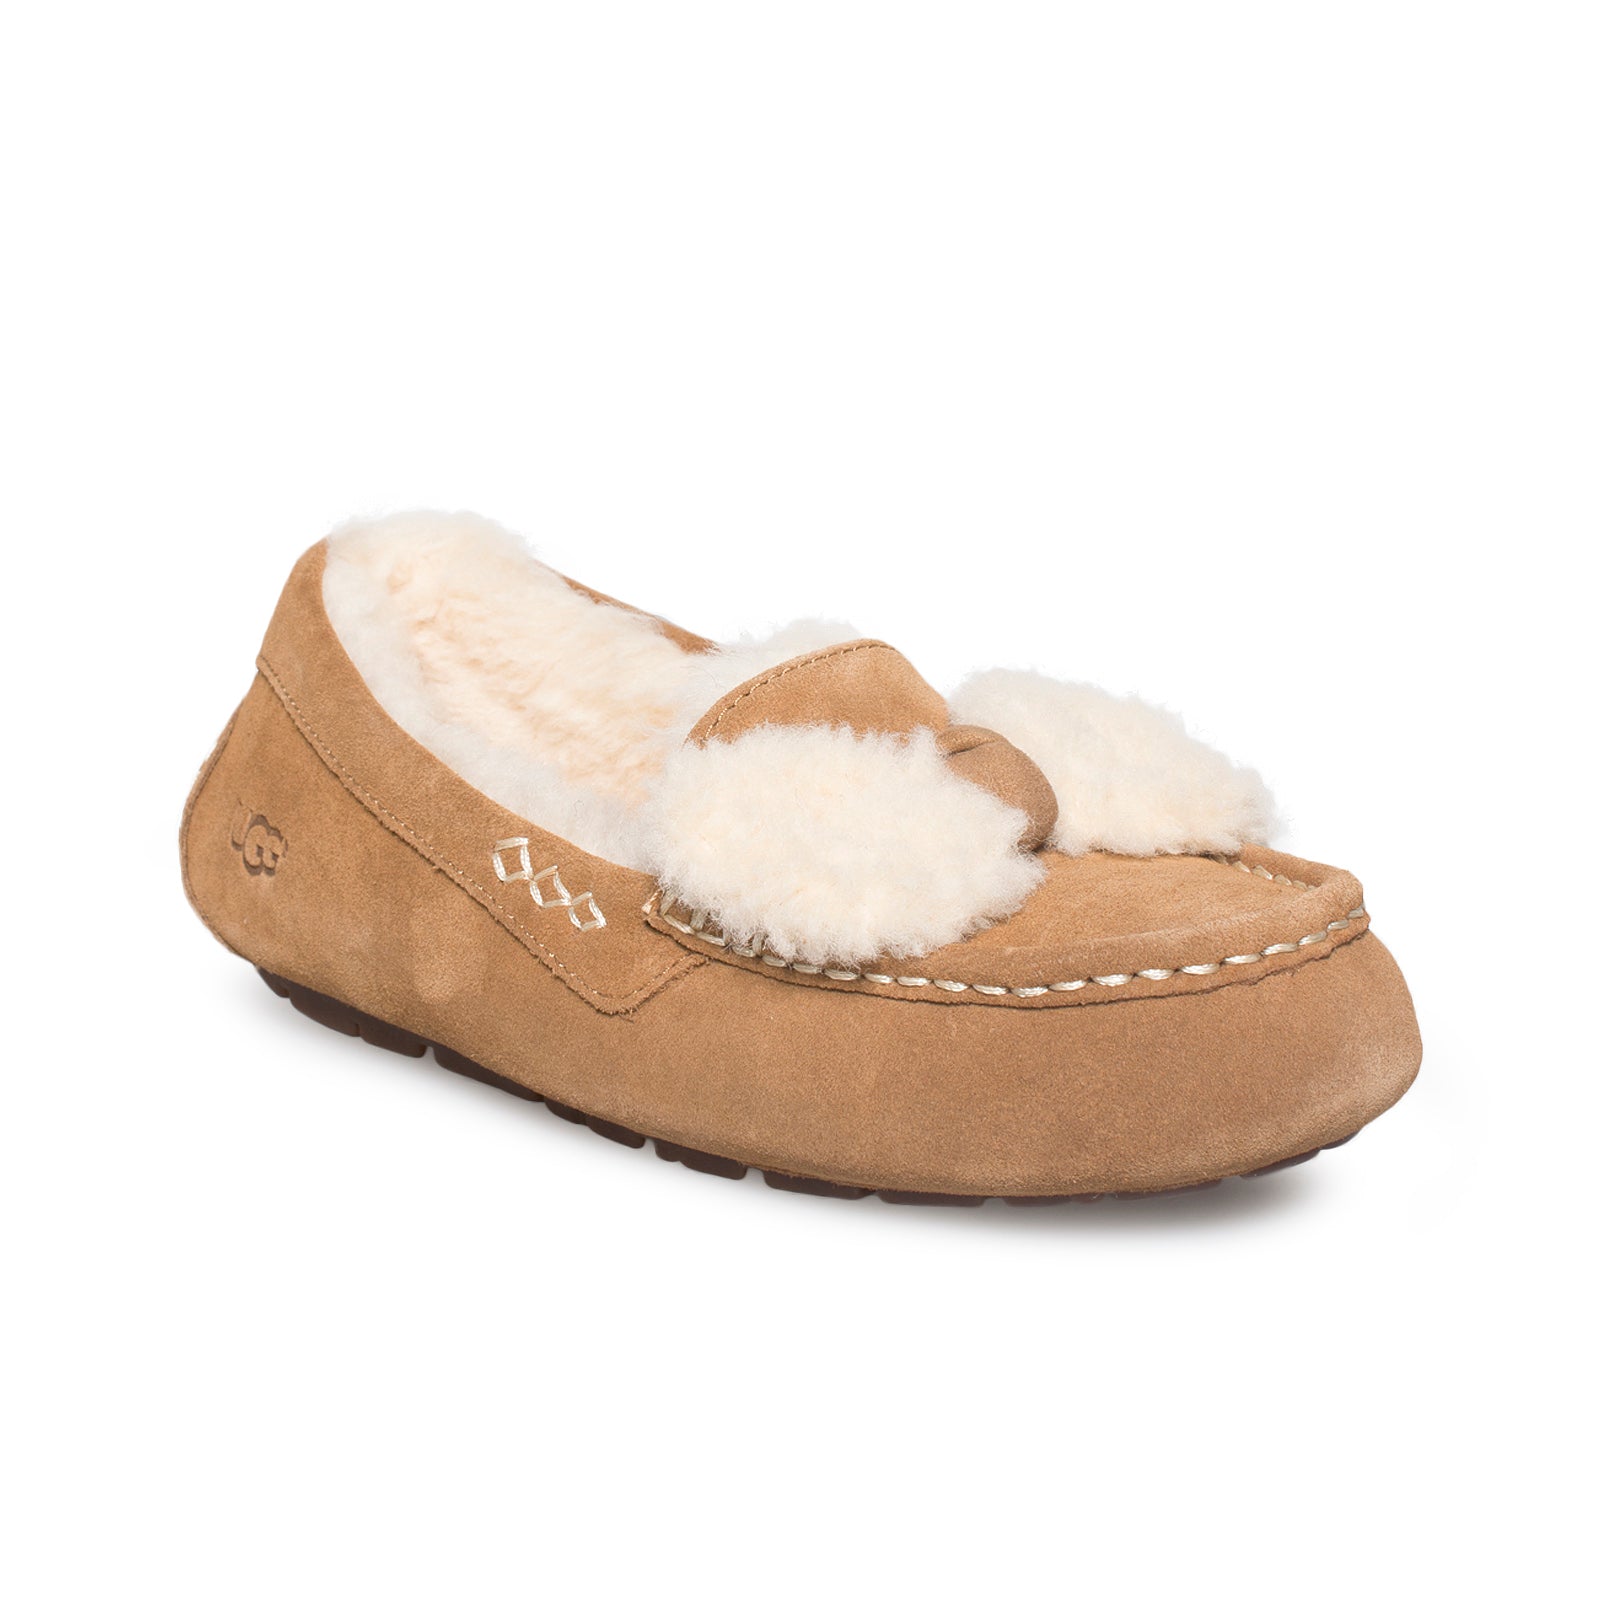 bow ugg slippers